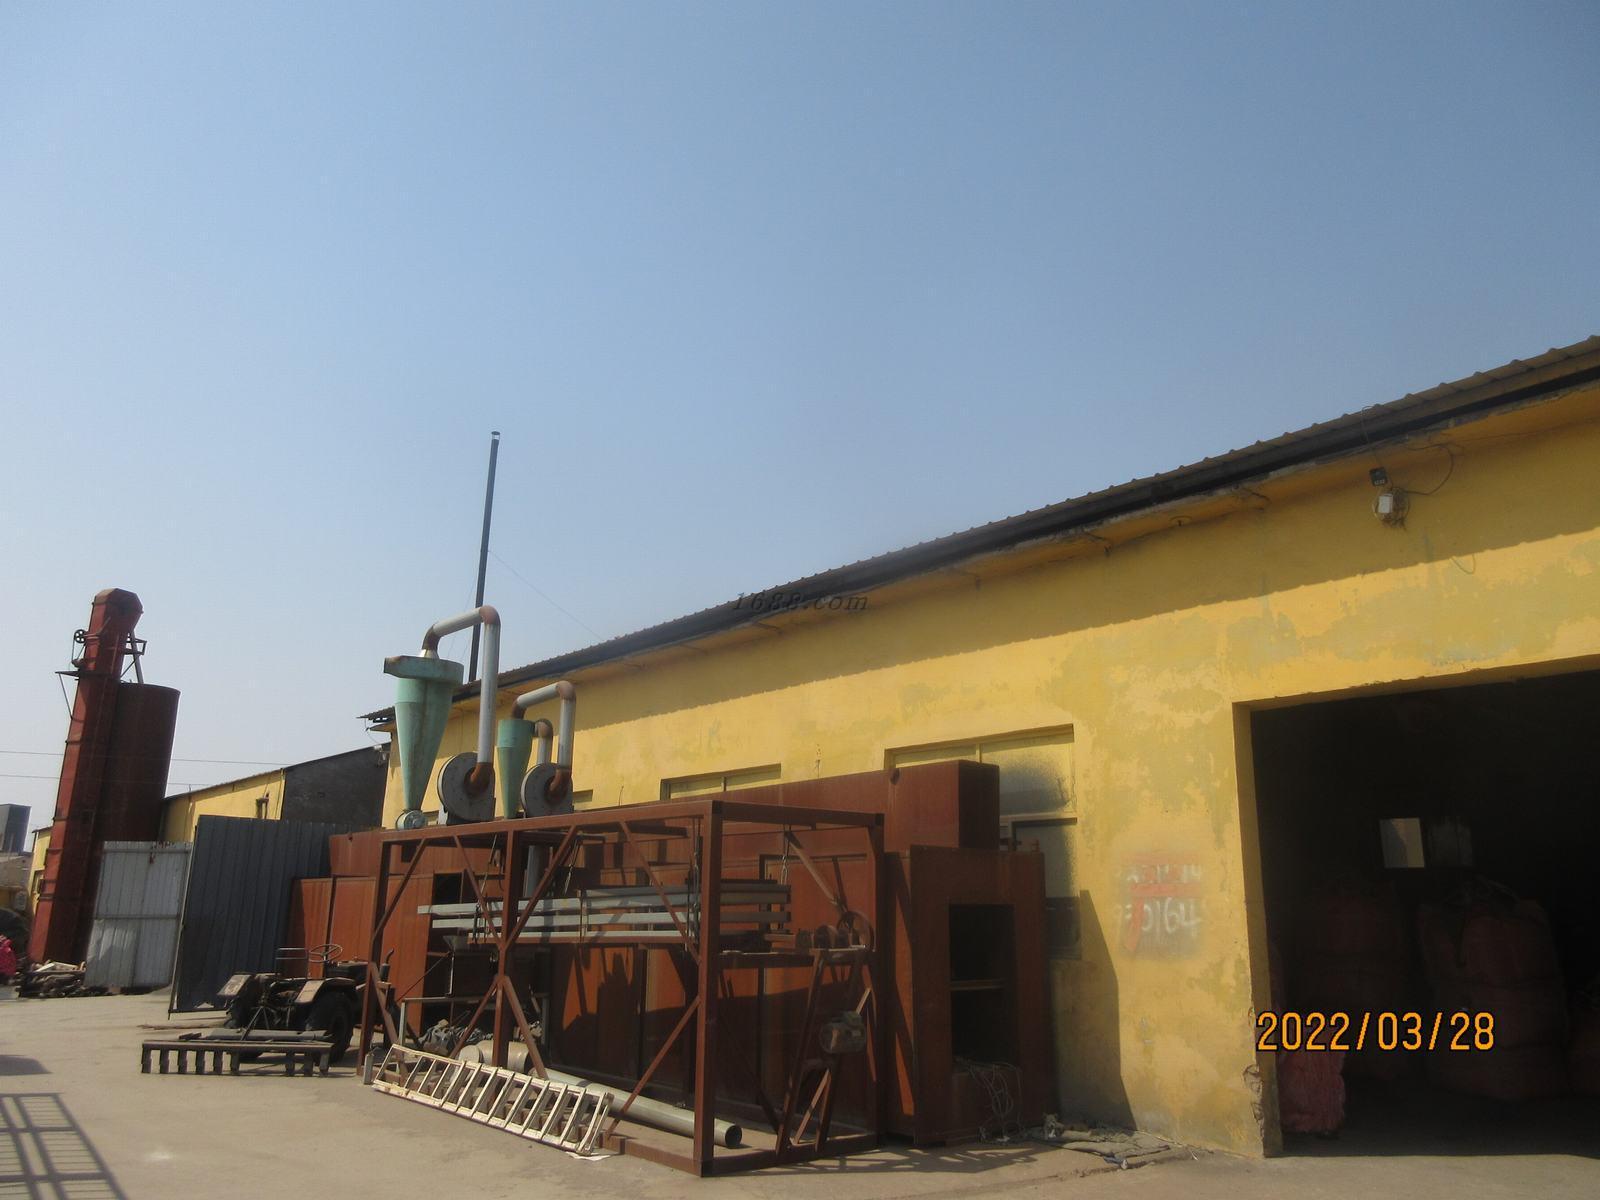   Lingshou Zhanteng Mineral Products Processing Factory